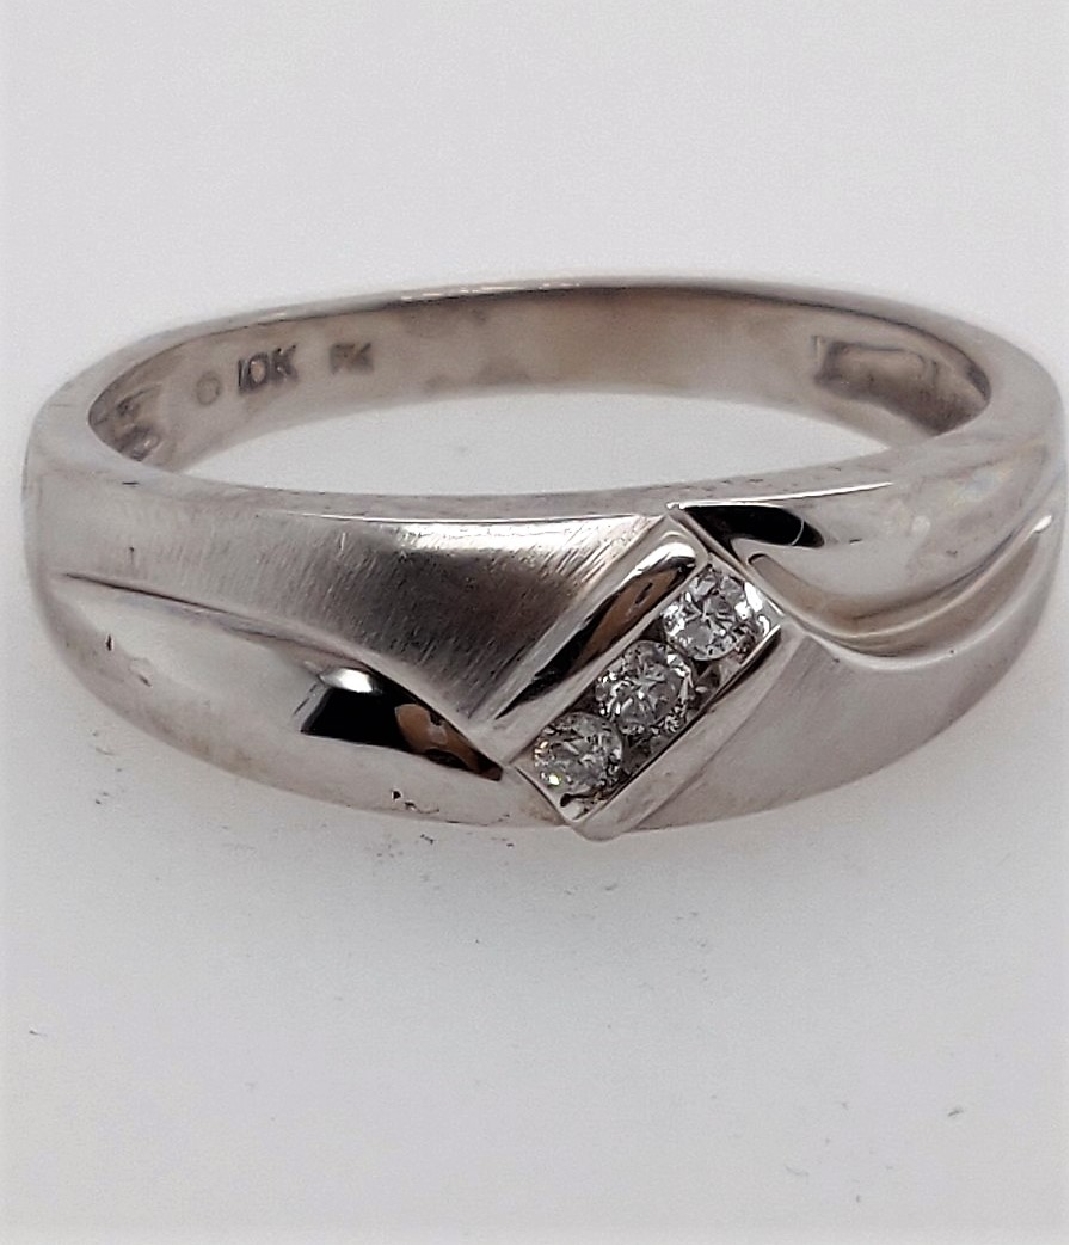 10k White Gold Gents Wedding Band with 3 Diamonds Size 9.5
0.10CTTW